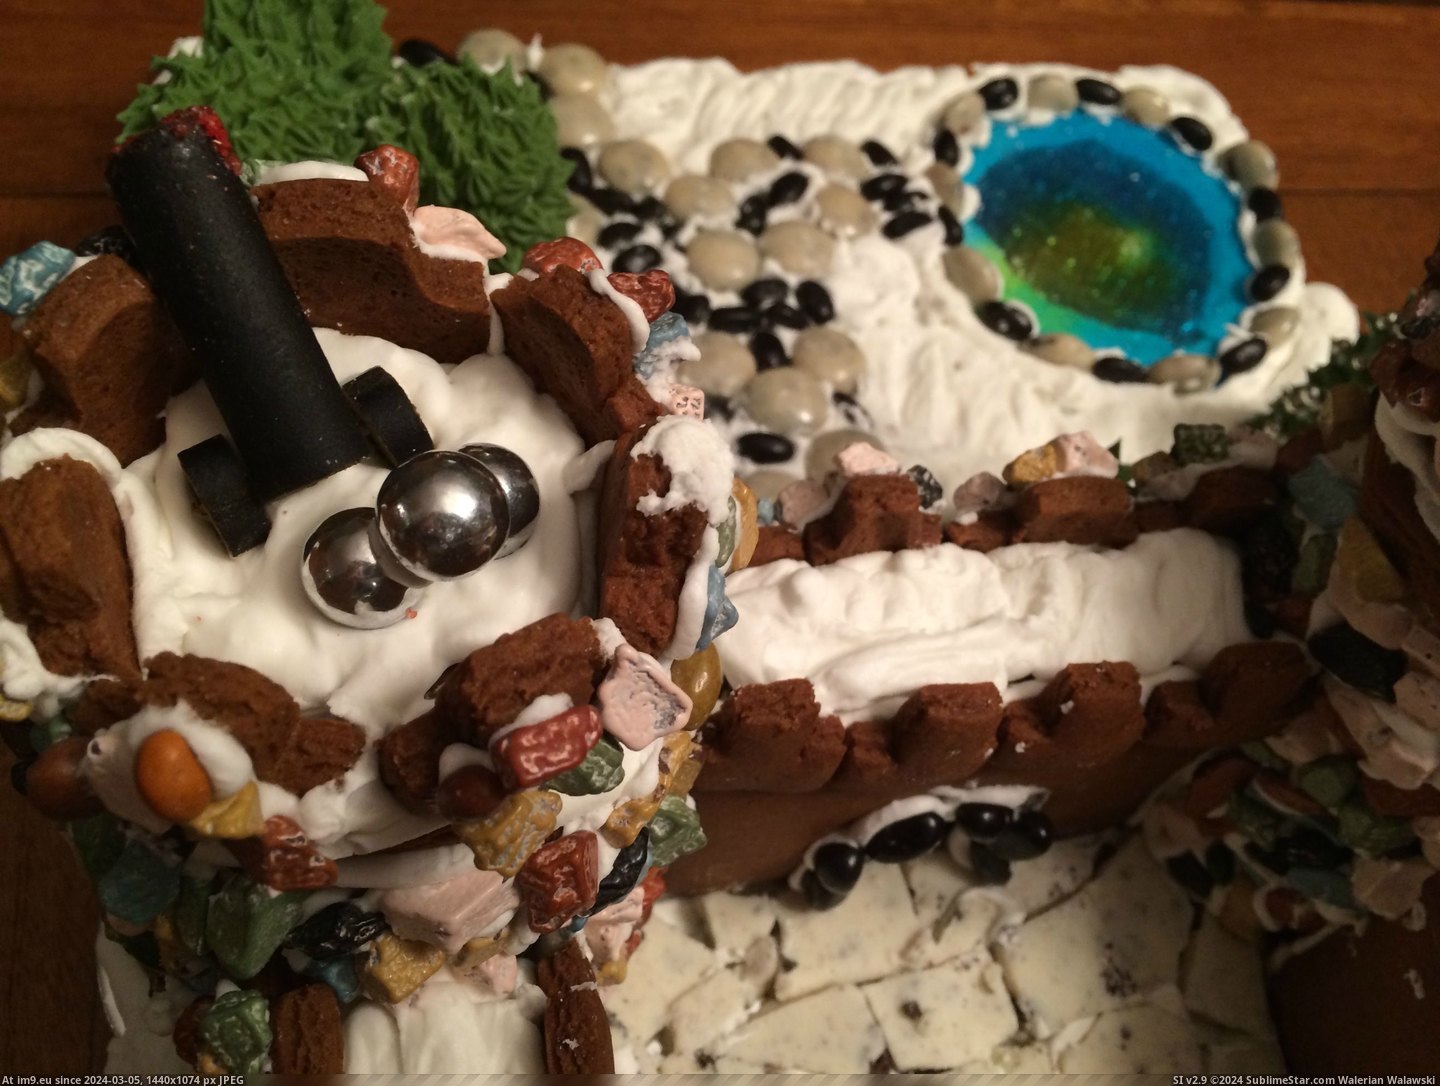 #Husband #Get #Our #Divorced #Collaborated #Project #Gingerbread #Success [Pics] My husband and I collaborated on our first gingerbread project and didn't get divorced...success! 7 Pic. (Image of album My r/PICS favs))